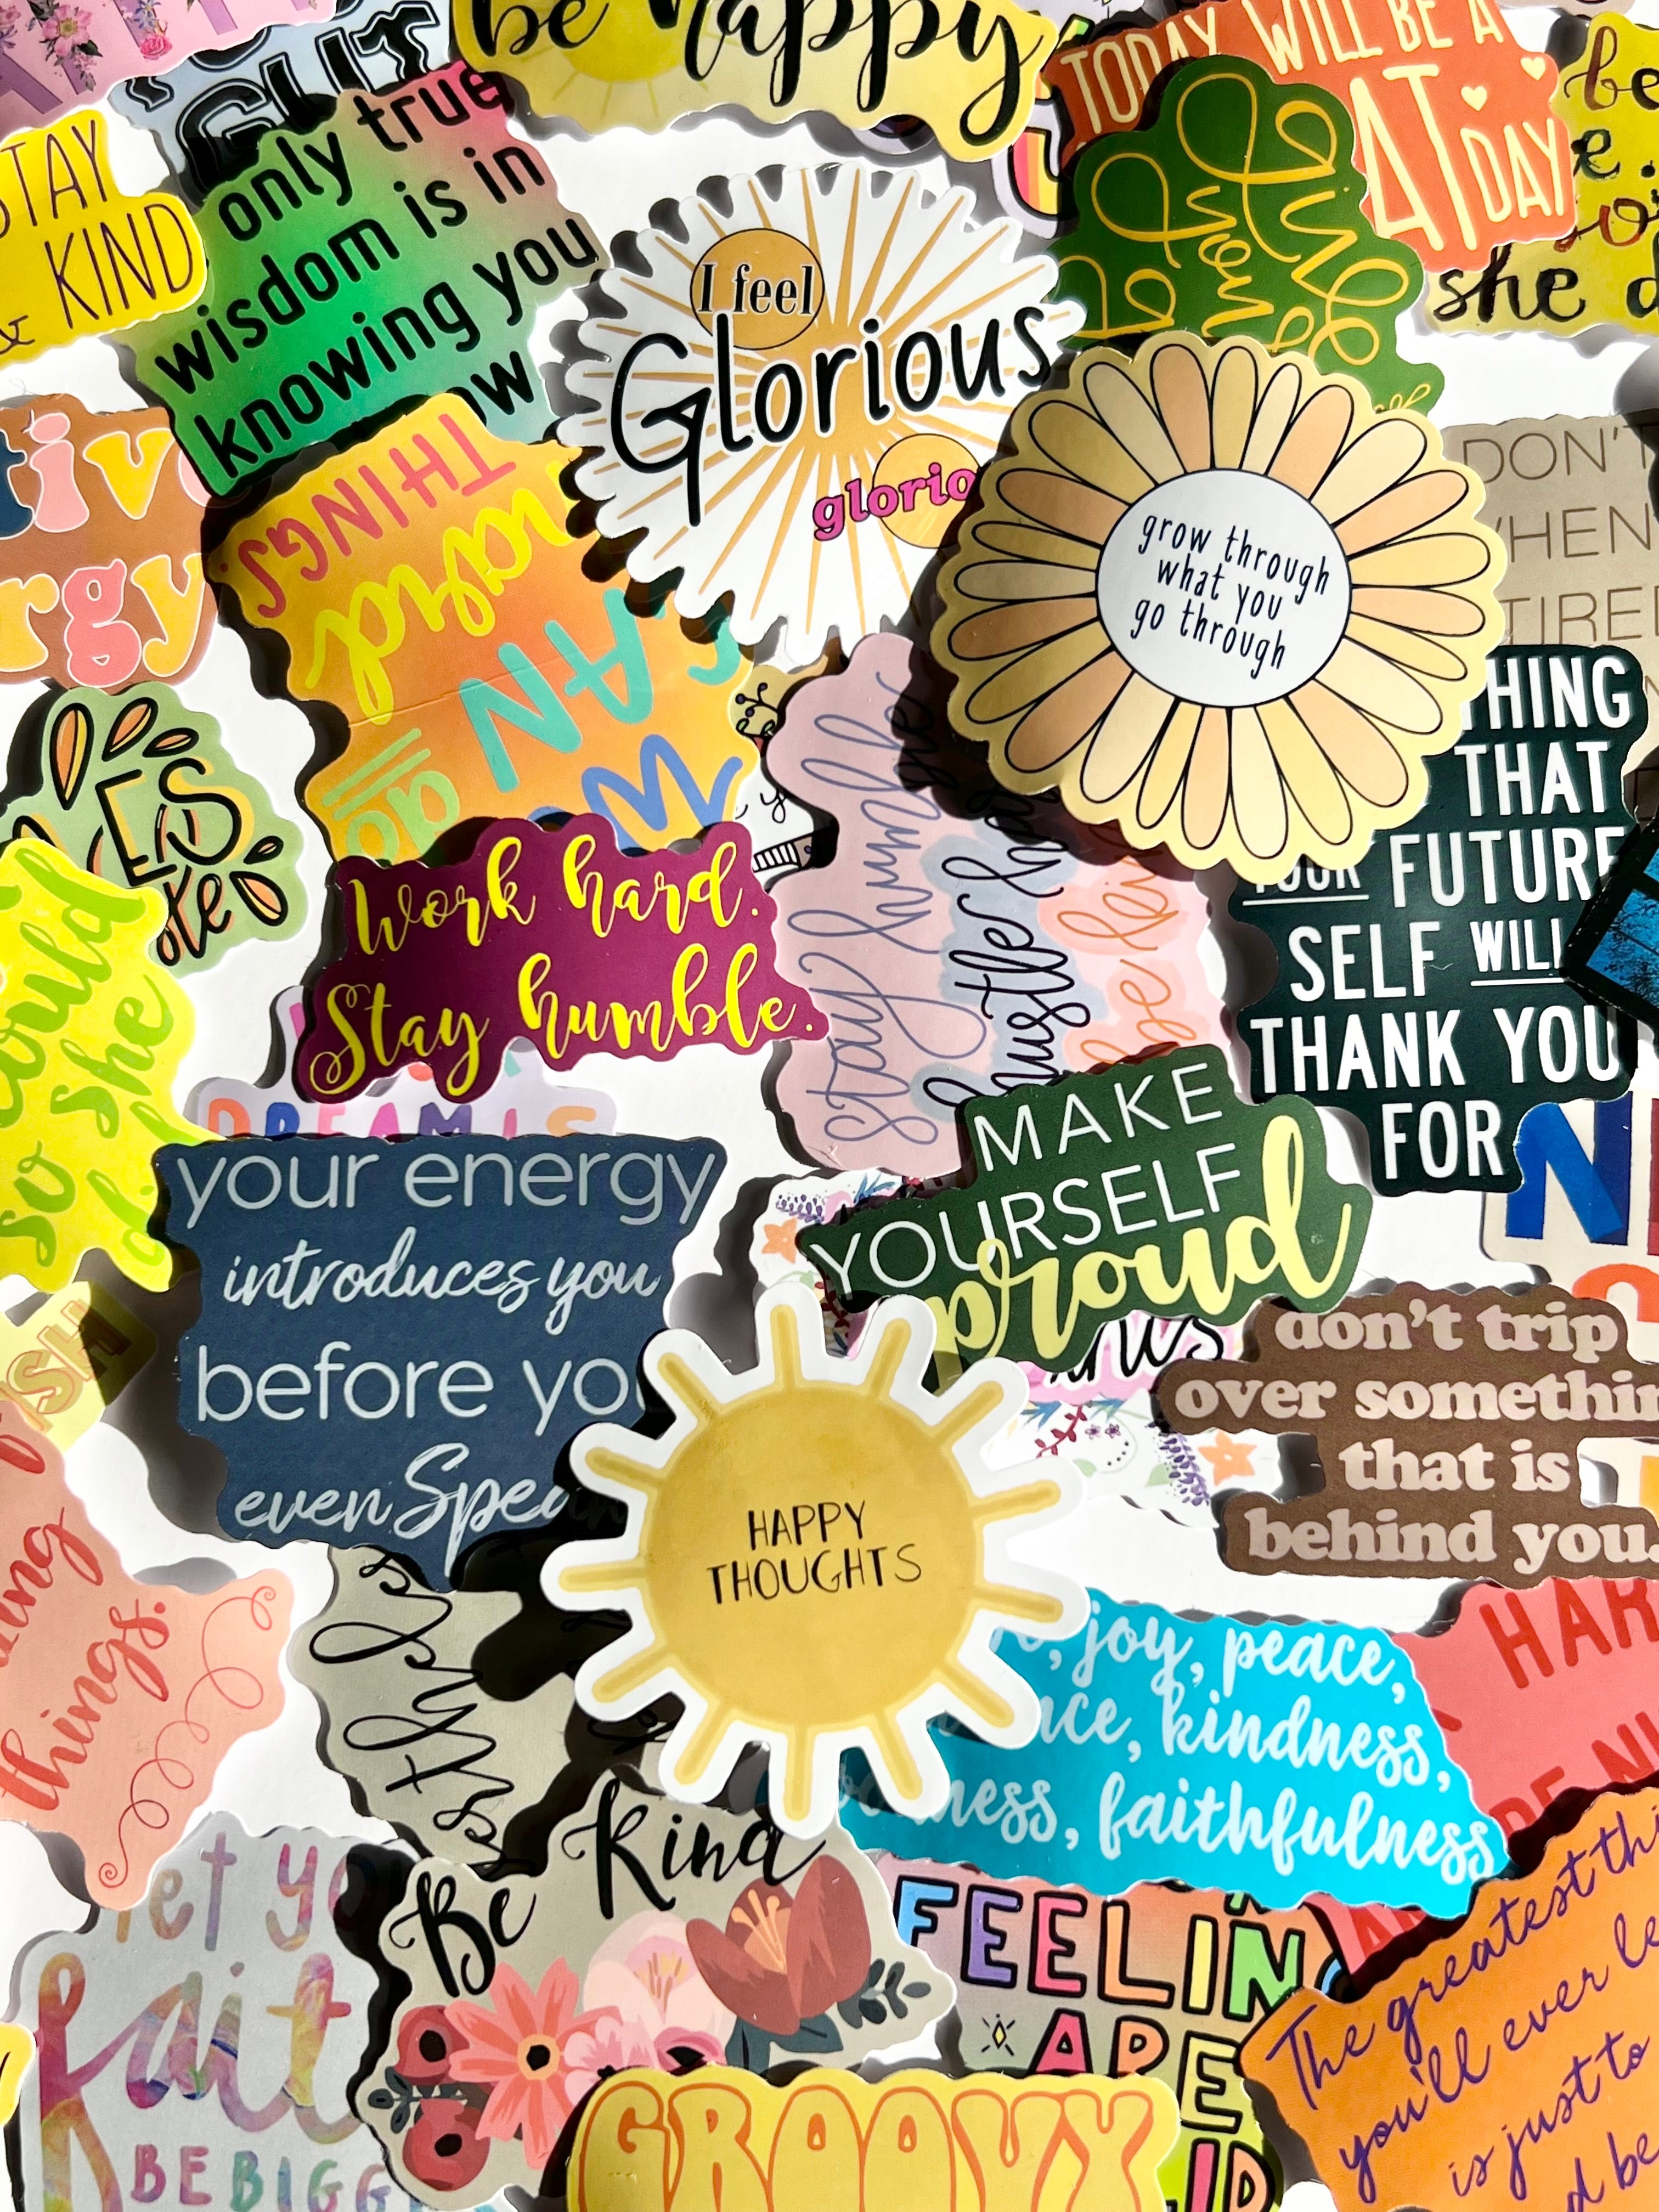 2024 Vision Board Kit Printable, Vision Board With Affirmations